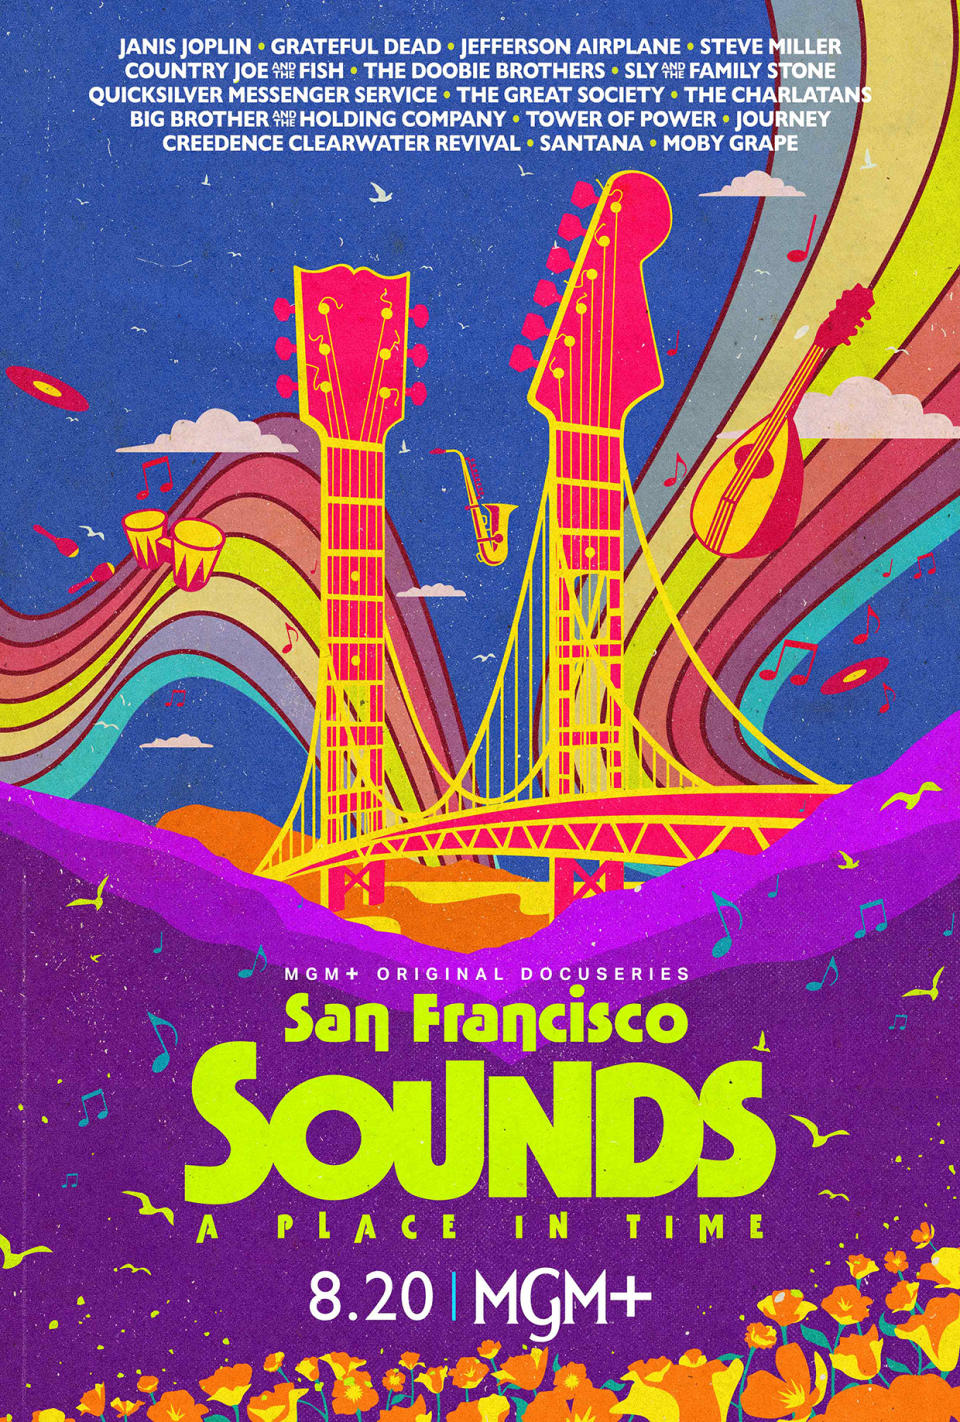 San Francisco, Sounds A Place in Time, MGM+